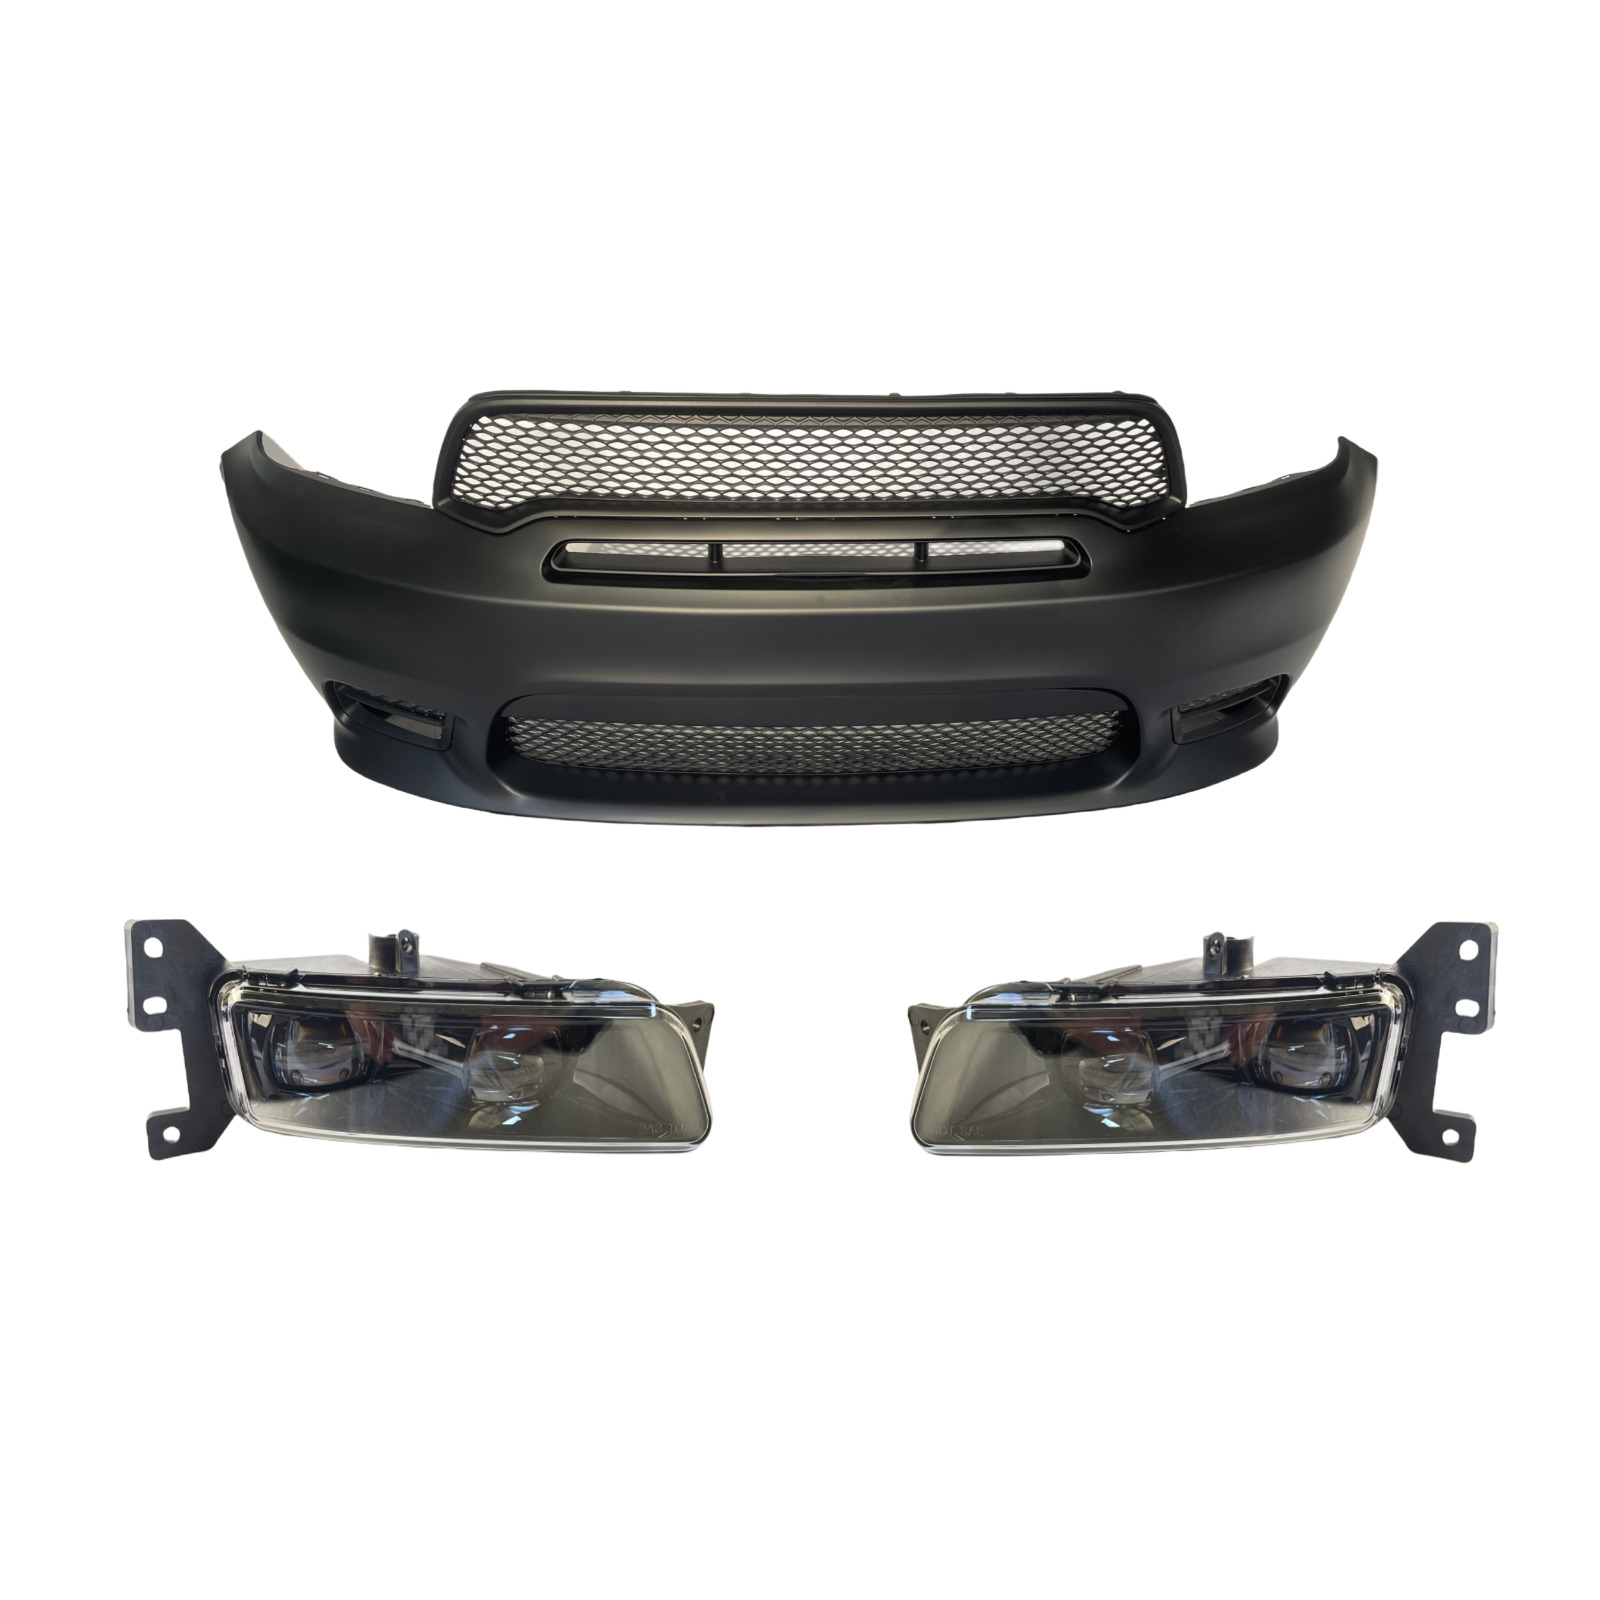 ⭐ FOR 2014-2020 DODGE DURANGO SRT STYLE FRONT BUMPER COVER GRILLE KIT ASSEMBLY ⭐